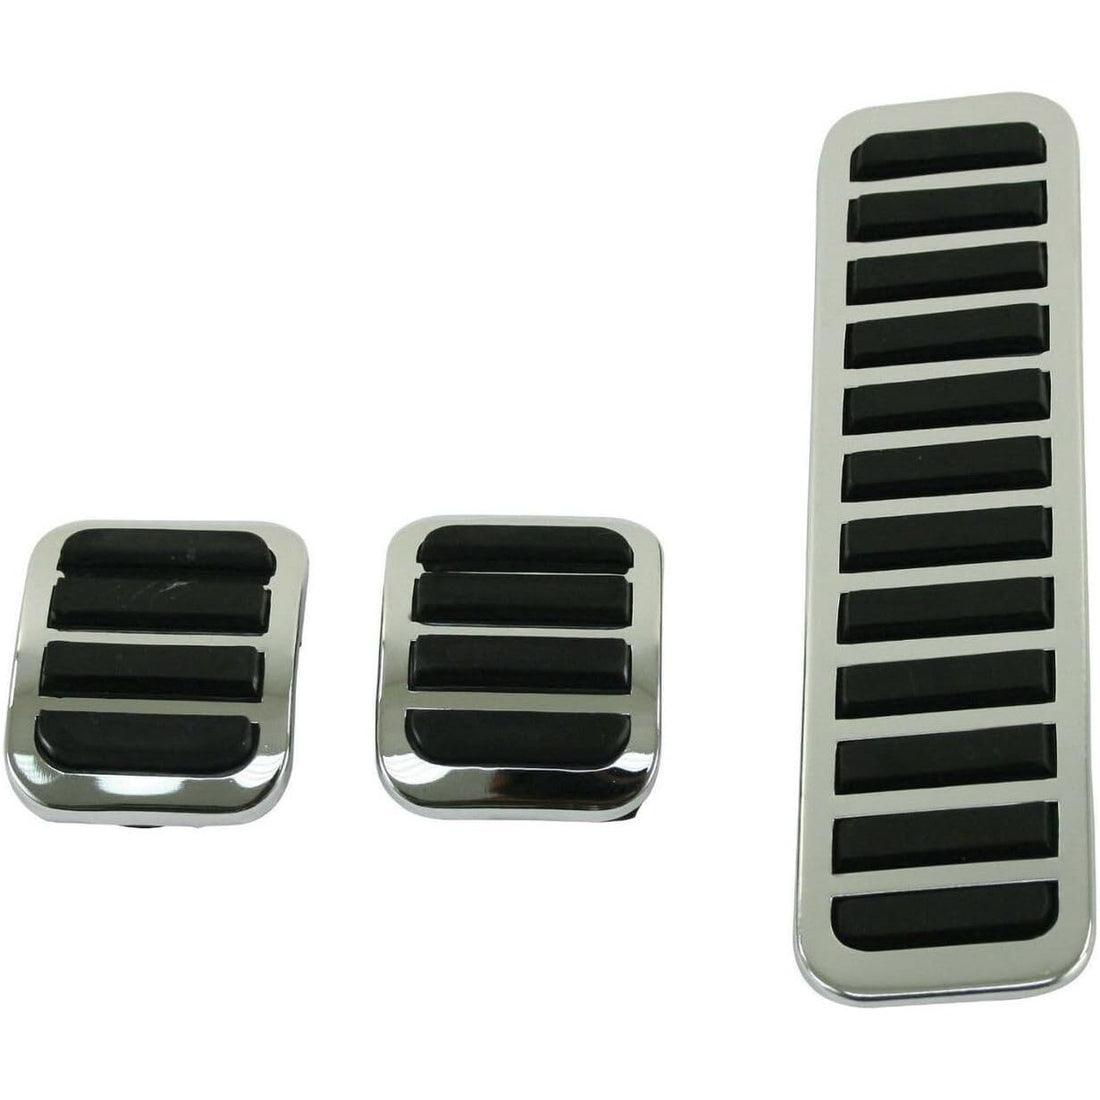 Custom Pedal Covers 3 Piece, Fits Stock VW Pedal Systems, Compatible with Dune Buggy